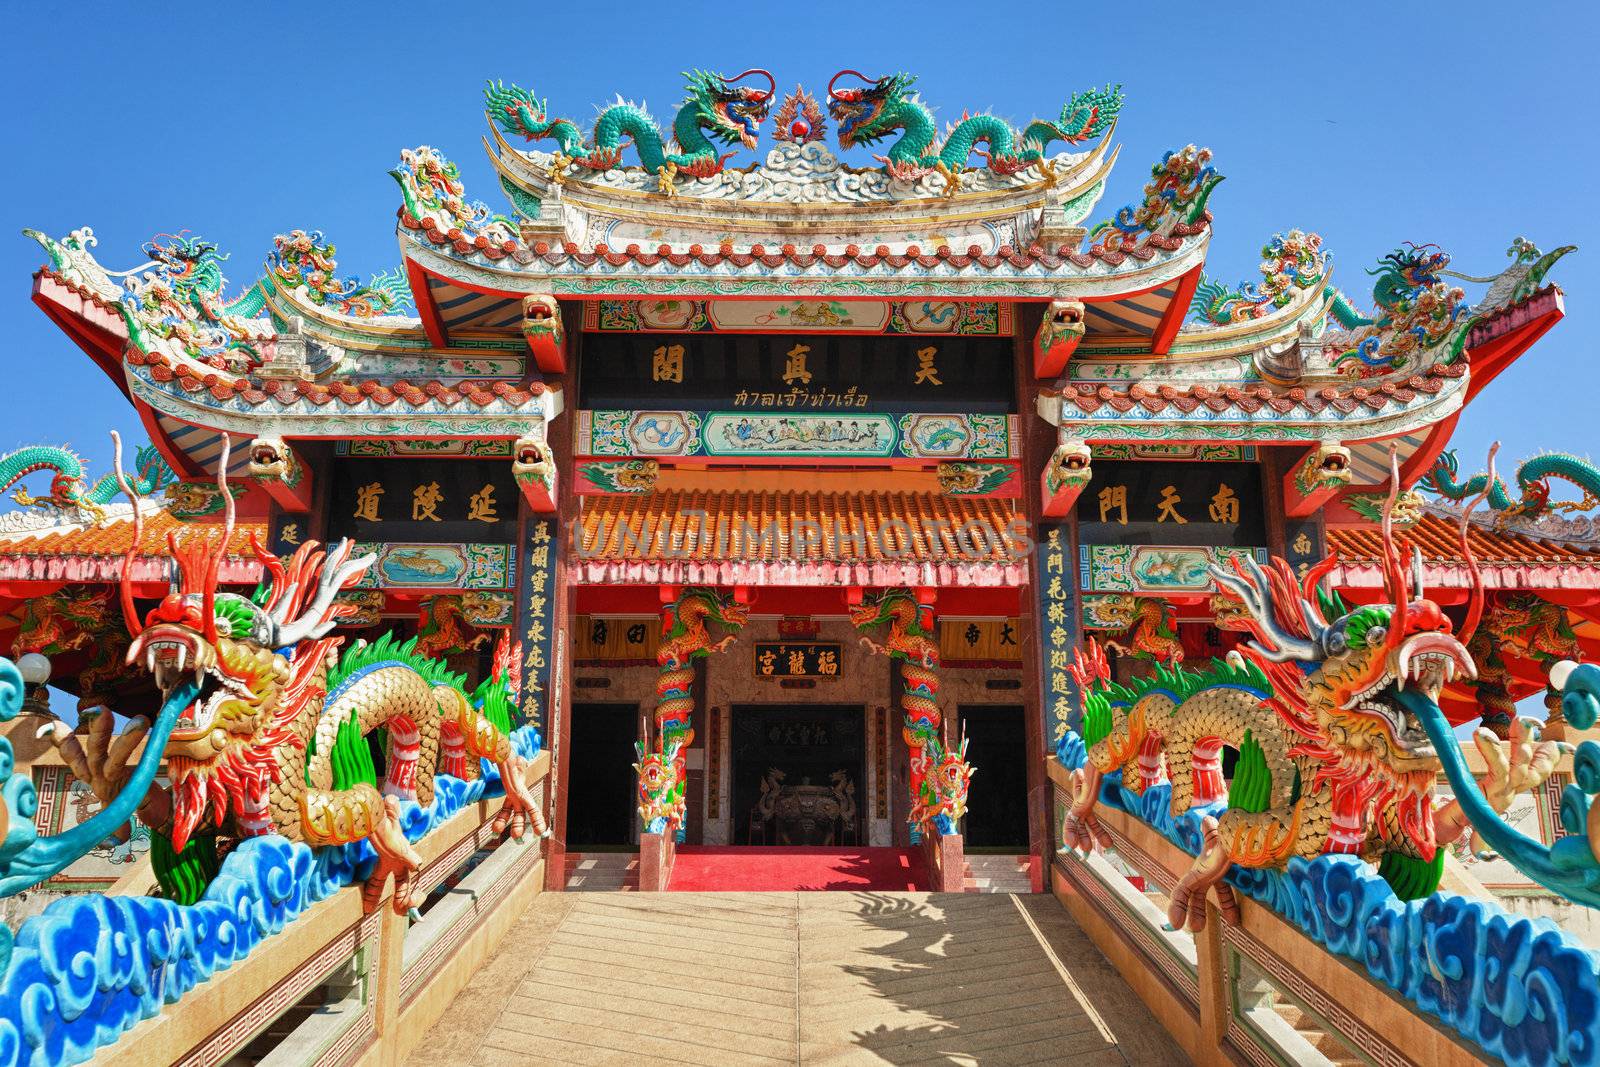 The facade of the Chinese Temple - entrance